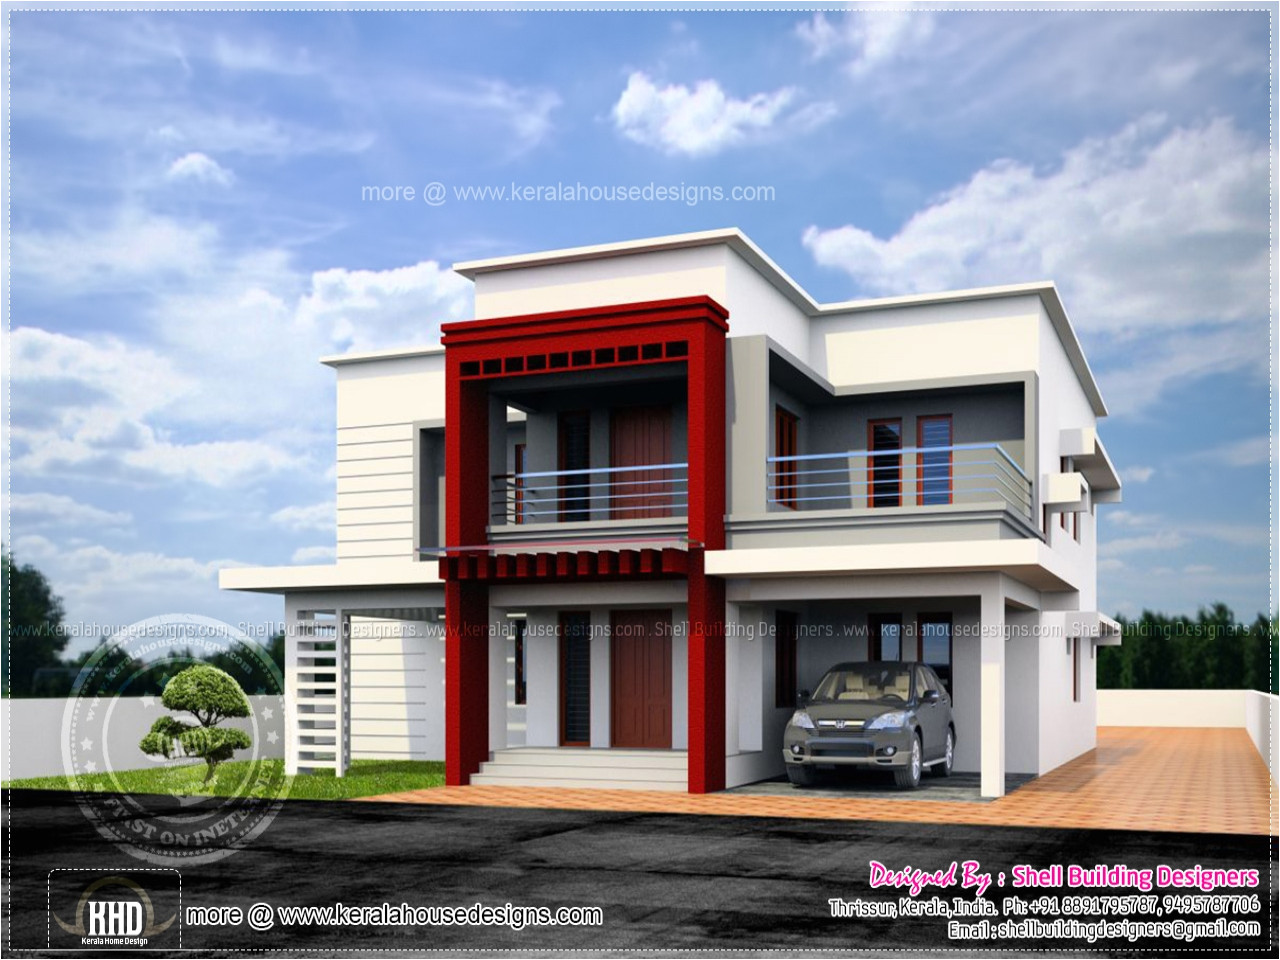 Small Bungalow Home Plans Latest Small Bungalow Images